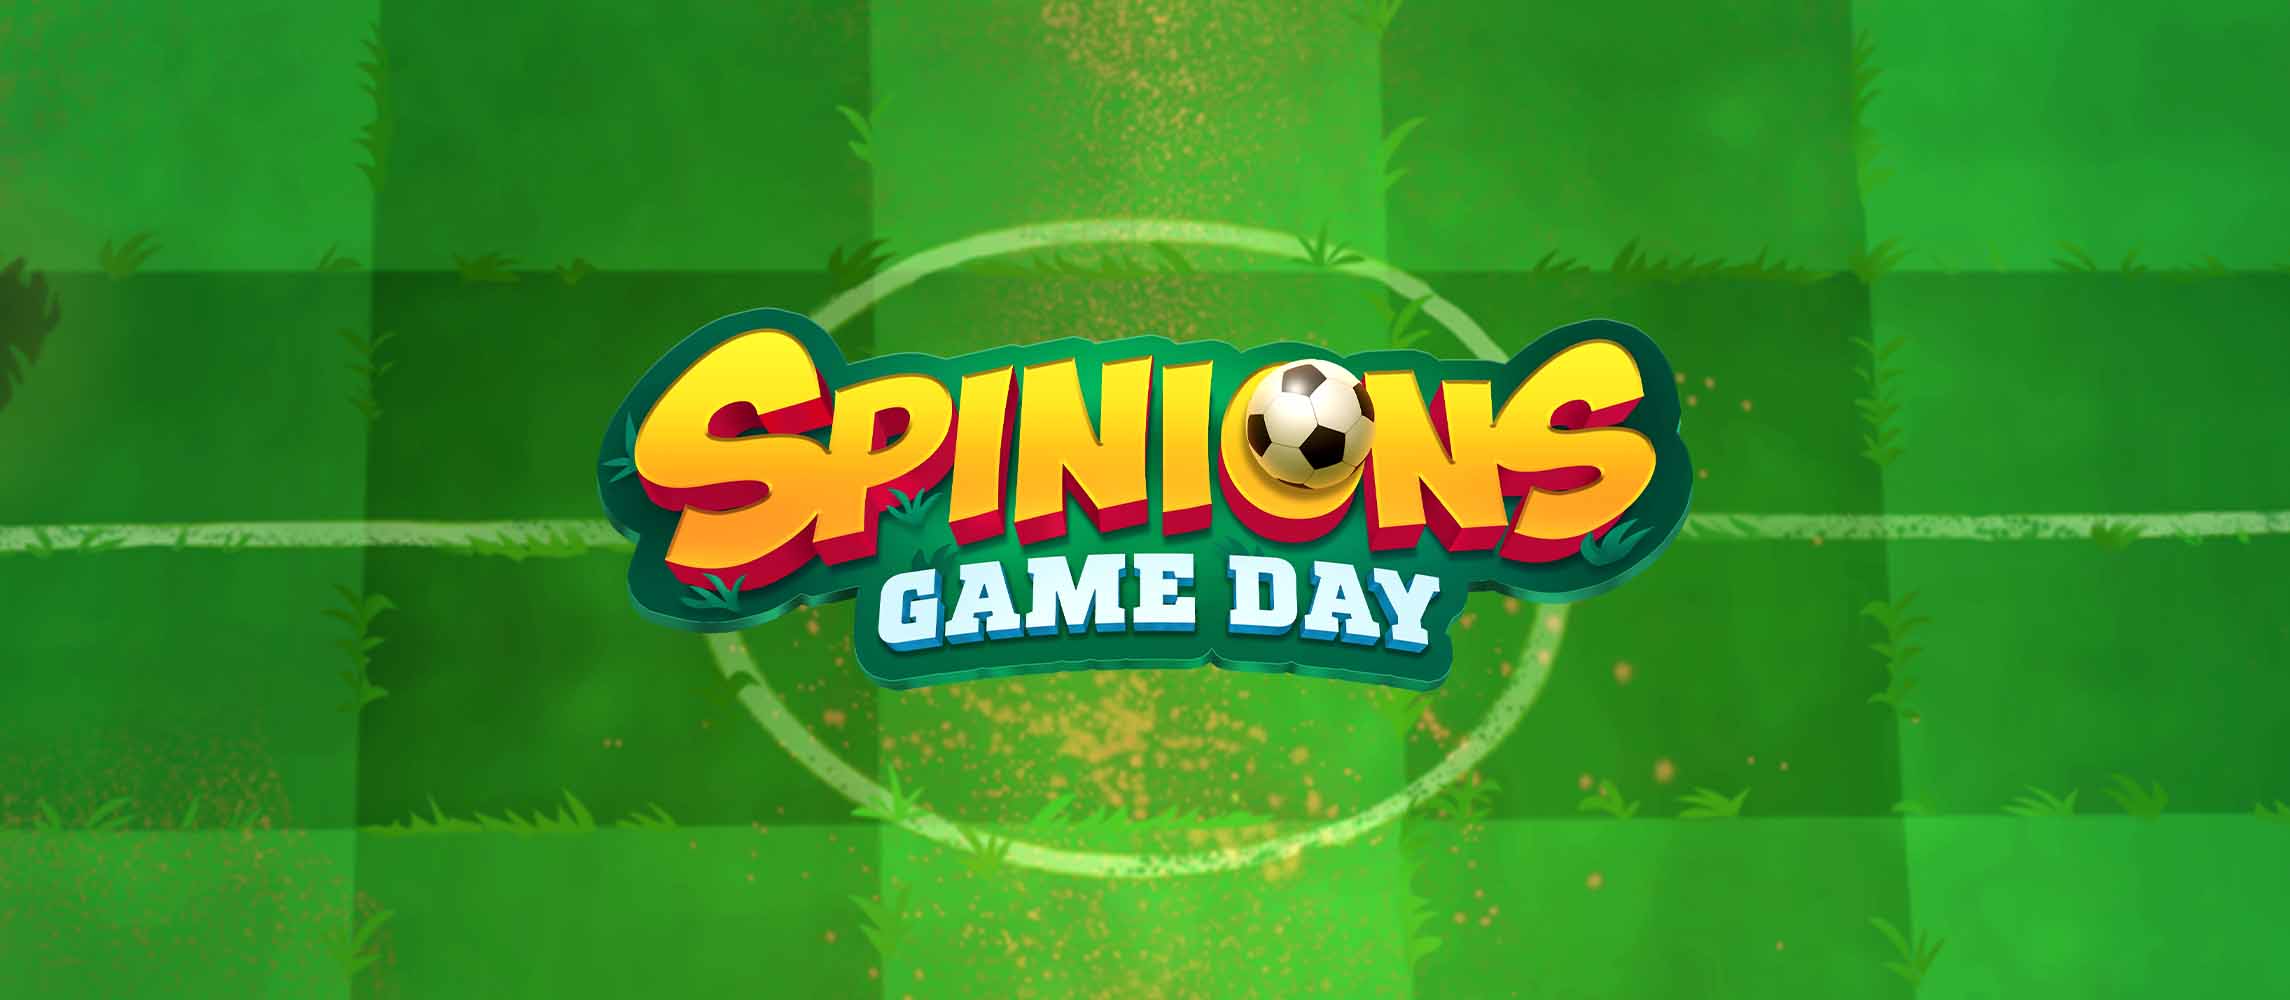 Spinions Game Day by Quickspin